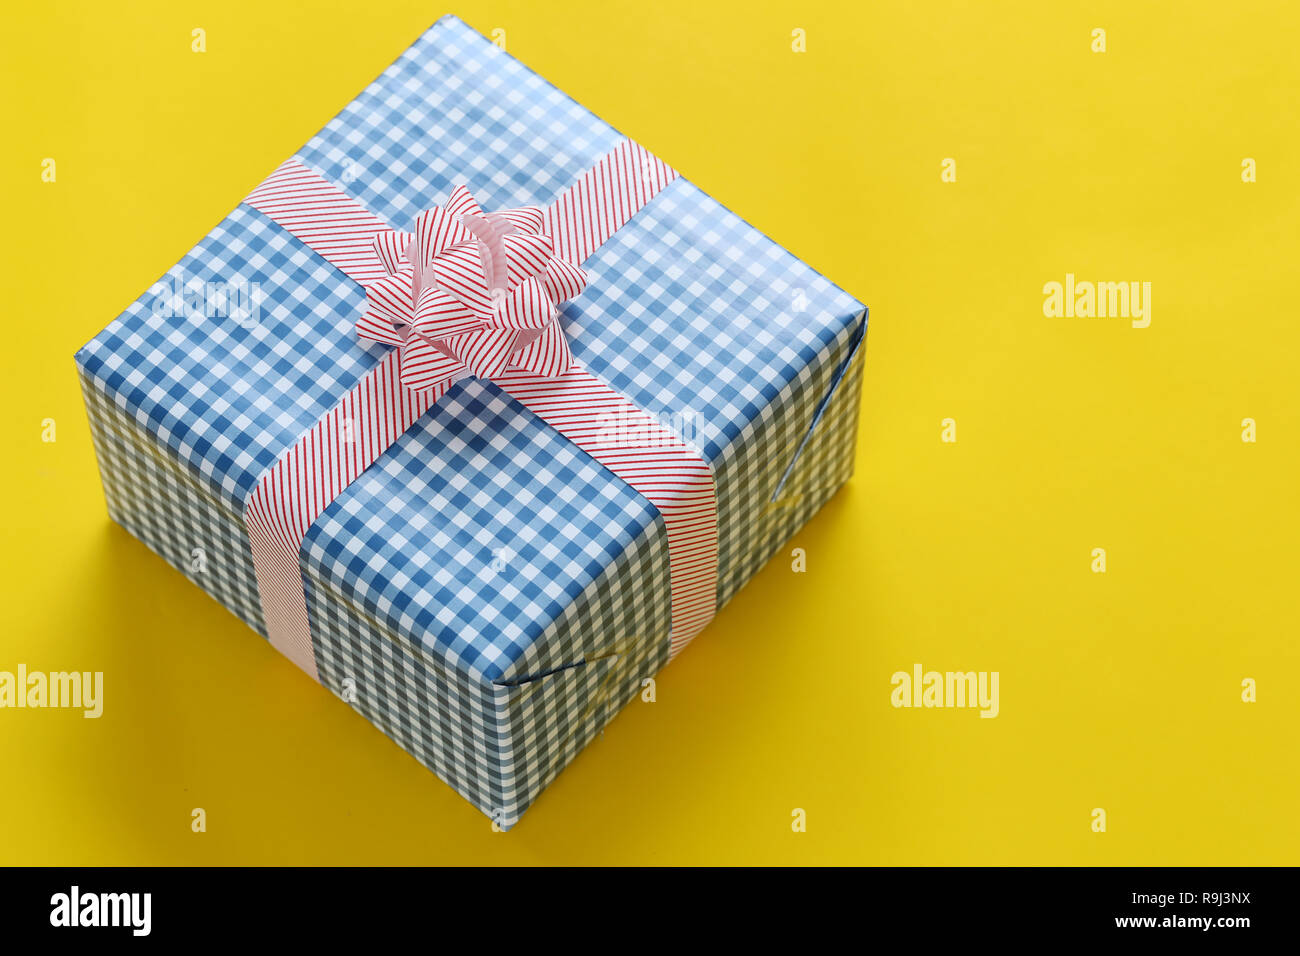 Blue Christmas gift box placed on a yellow art paper floor and have copy space for design in your work Important day concept. Stock Photo